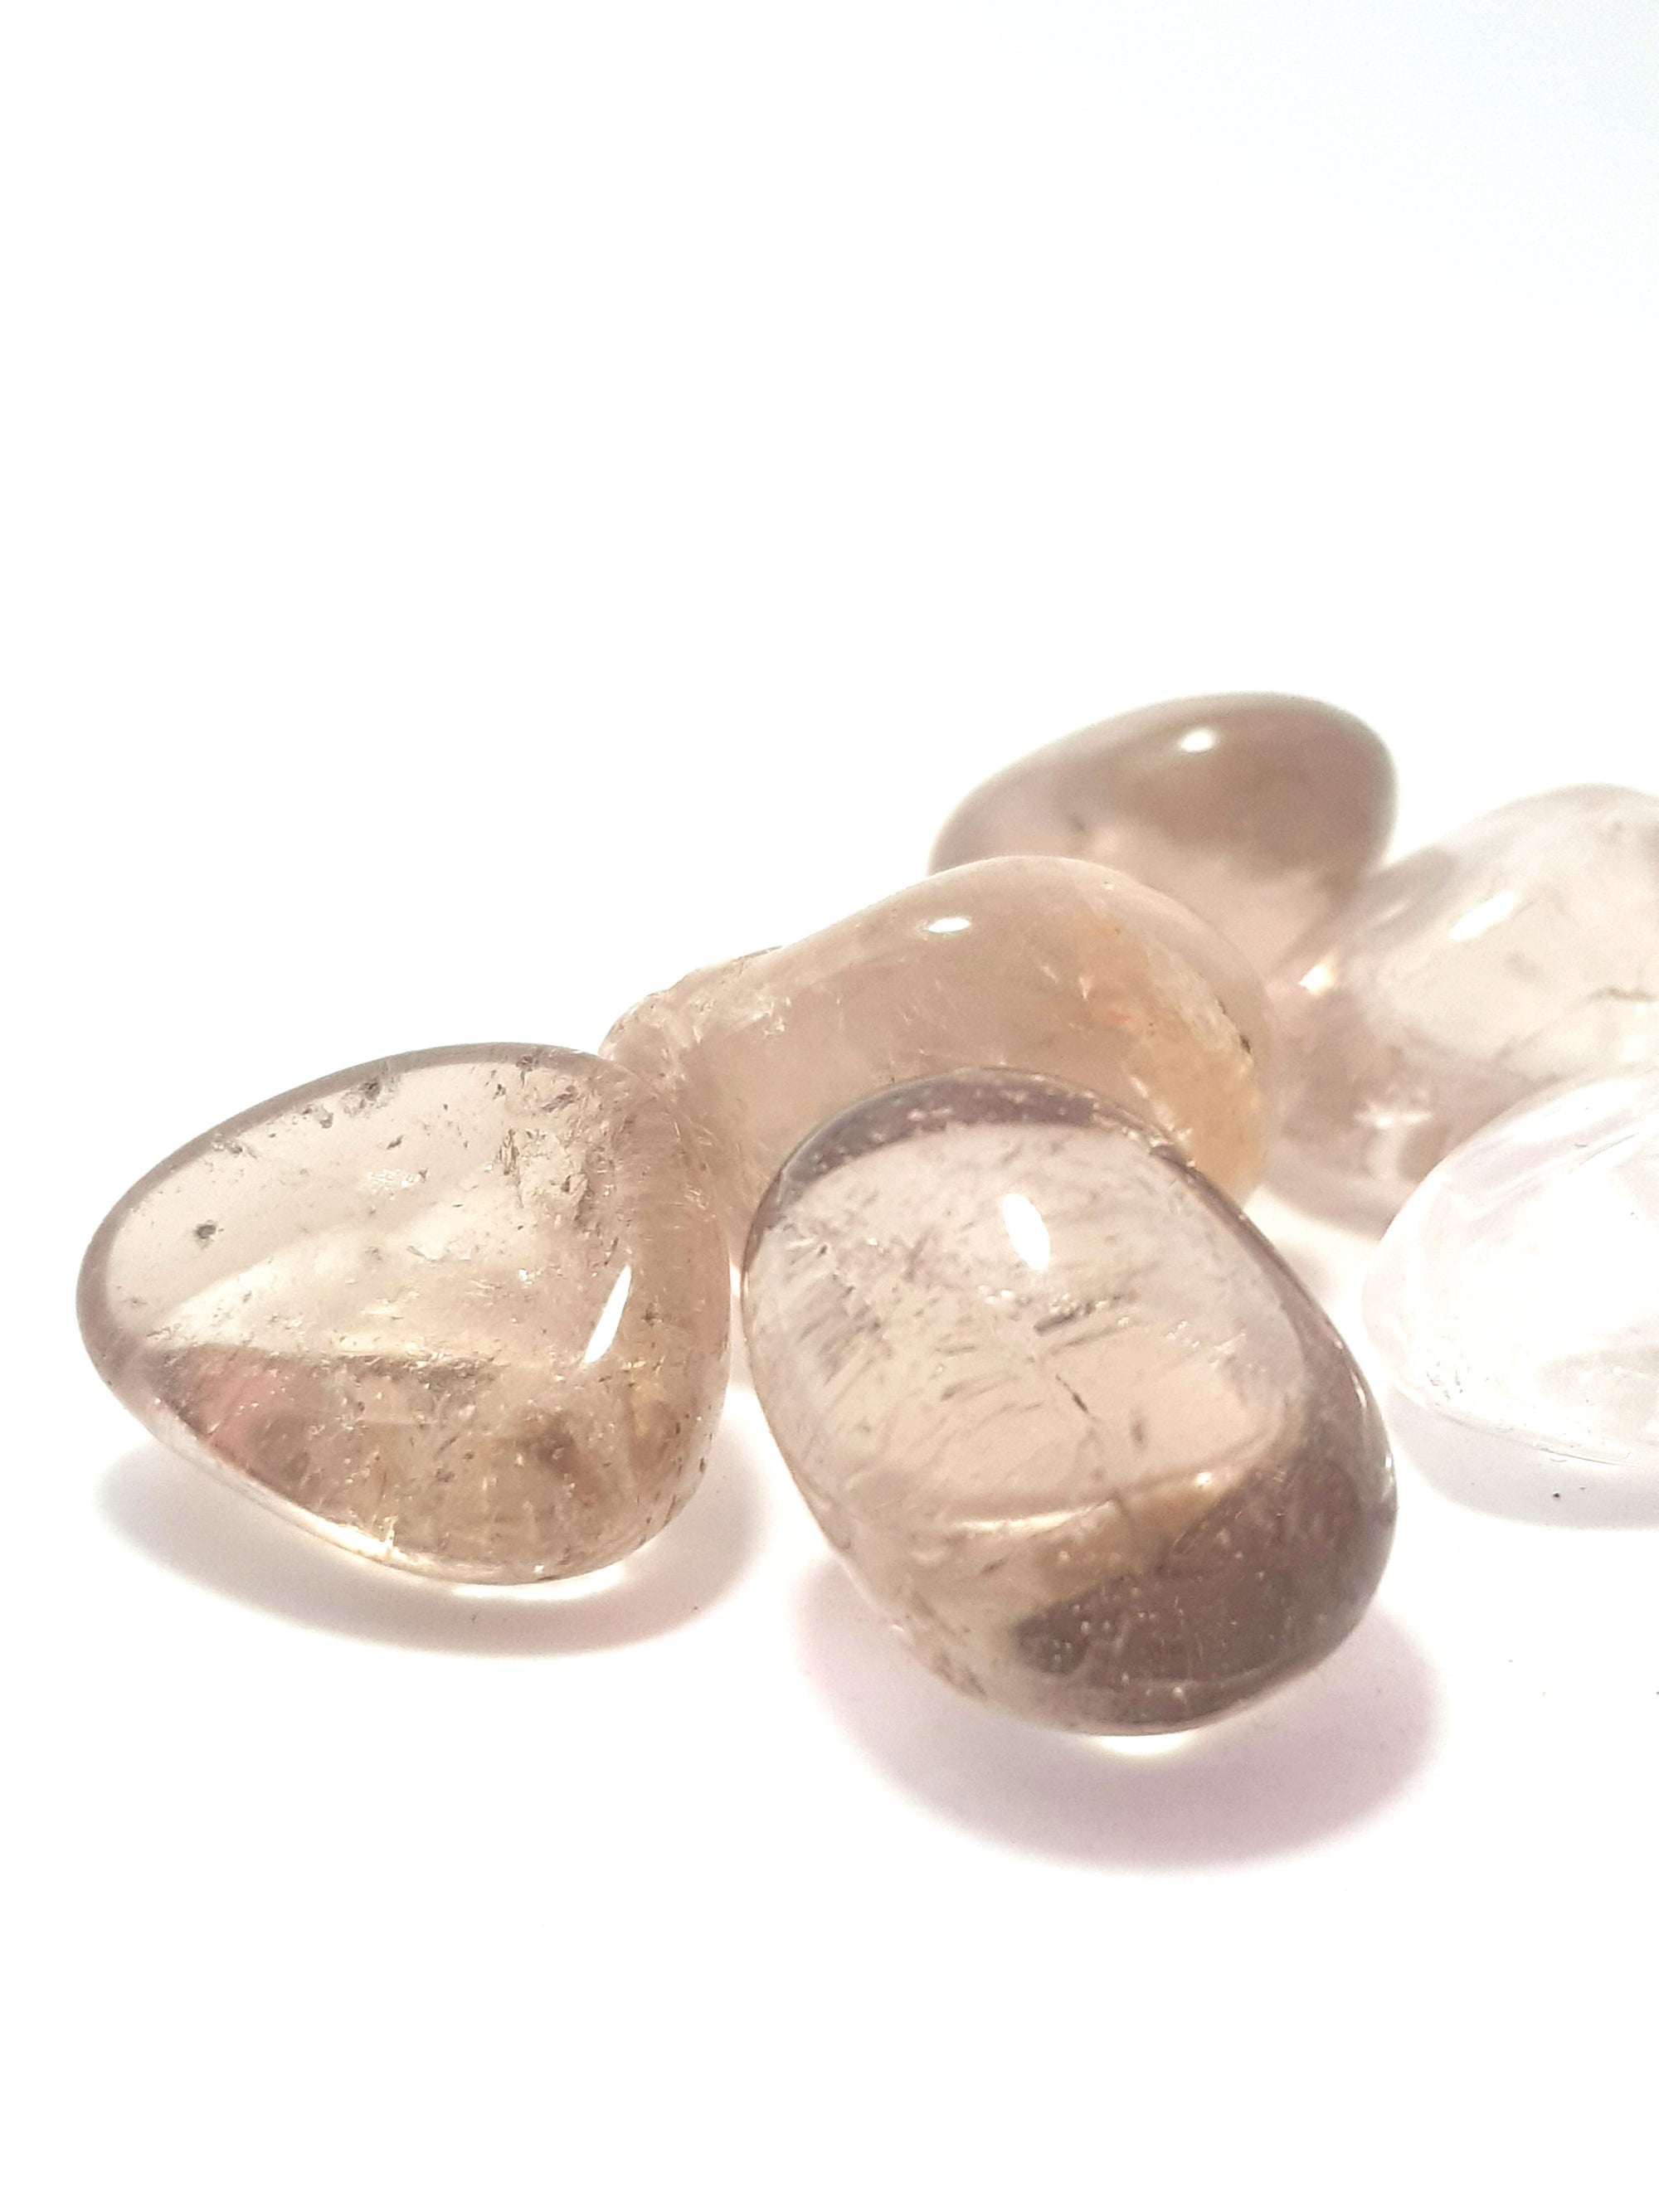 a close up of smoky quartz tumblestone. They are light grey and very translucent.